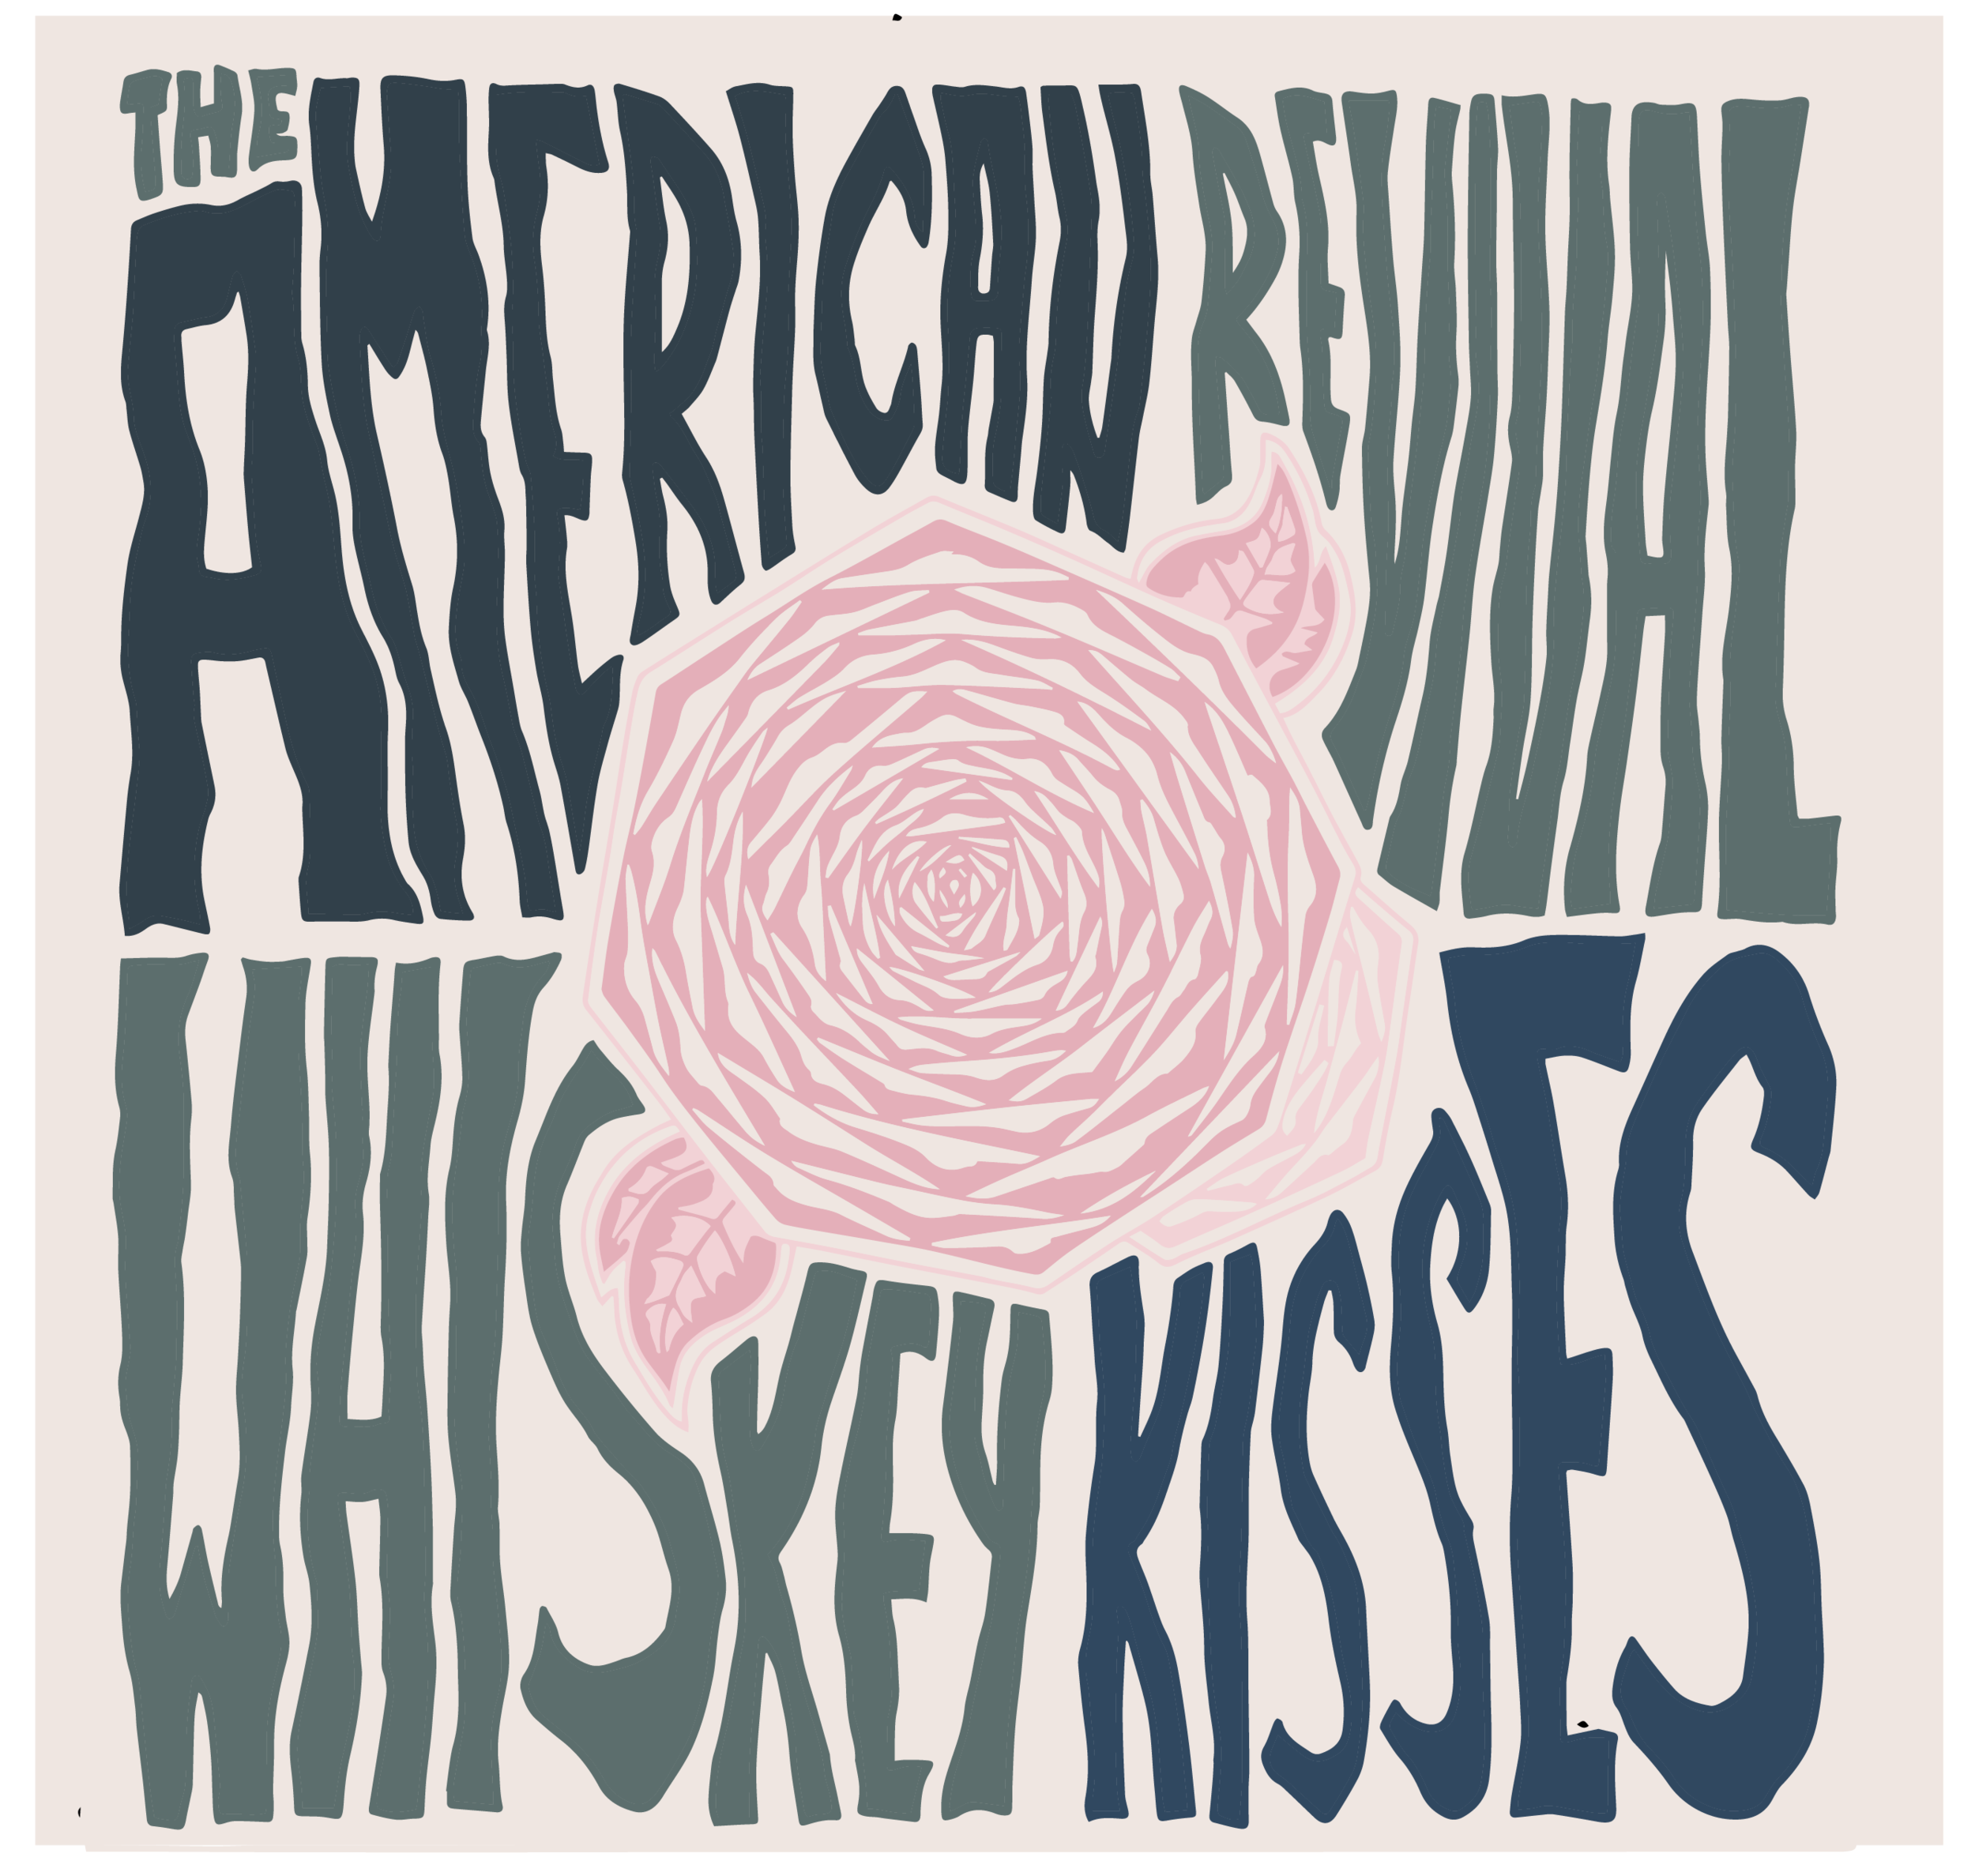 The American Revival "Whiskey Kisses" Single Cover